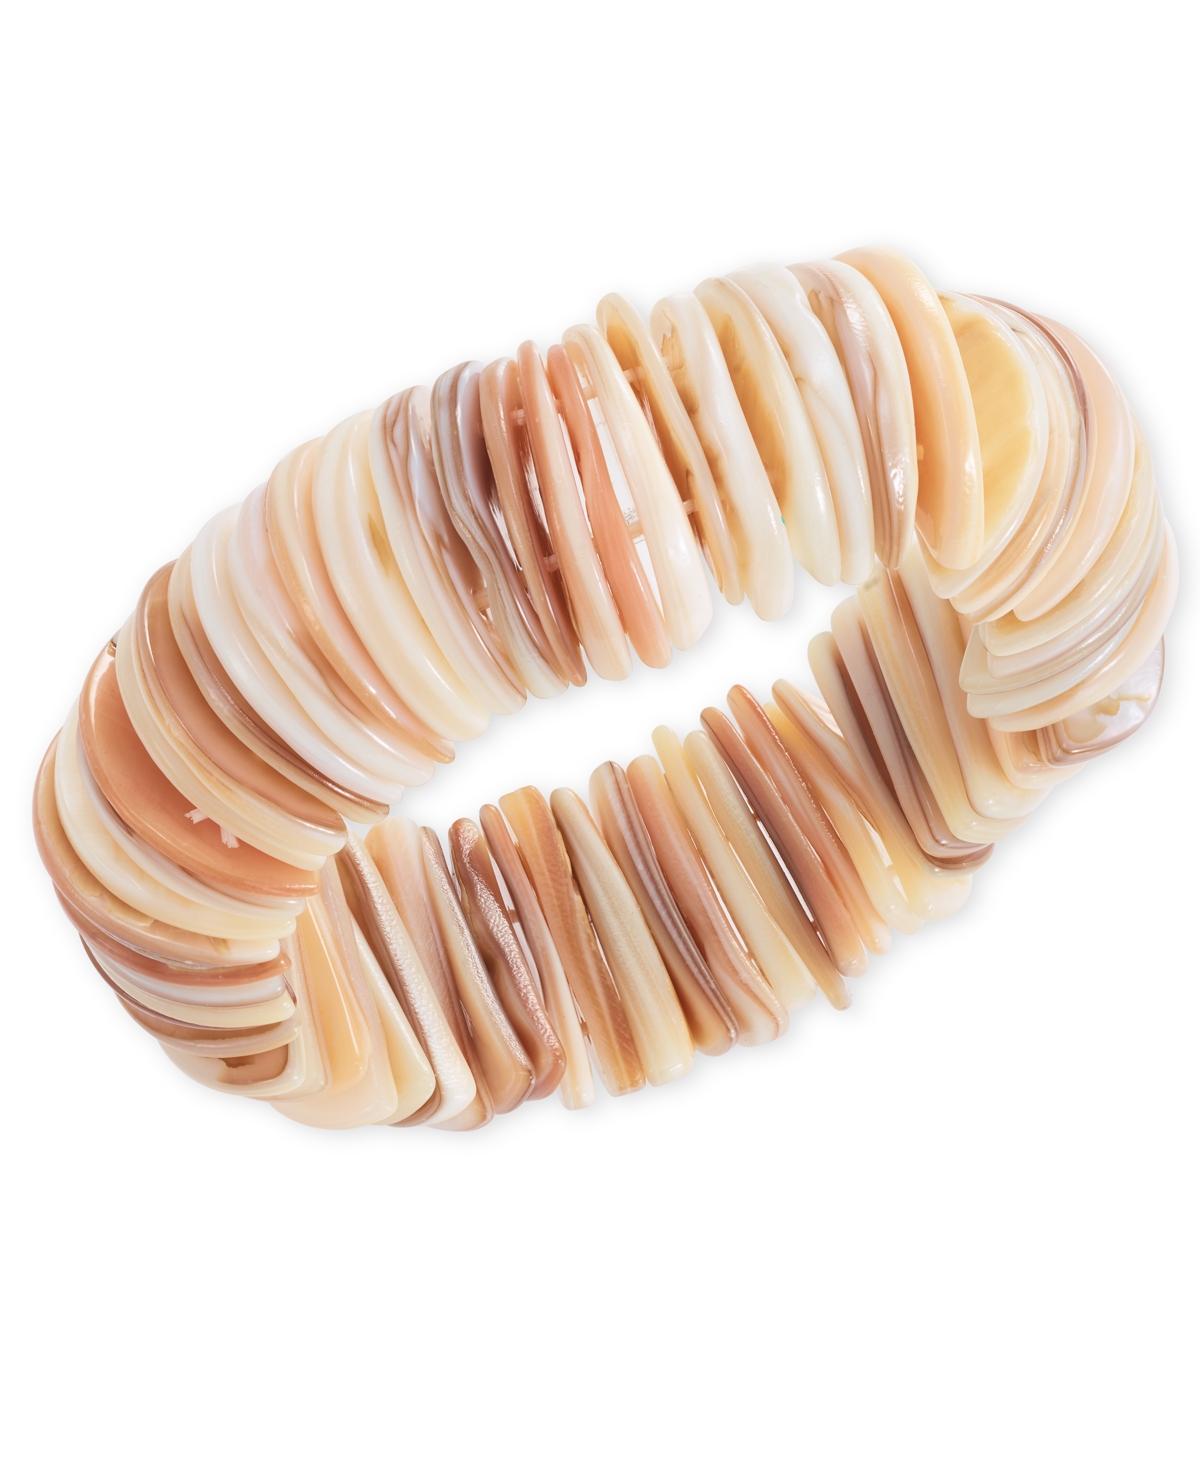 Rivershell Statement Stretch Bracelet, Created for Macy's - White